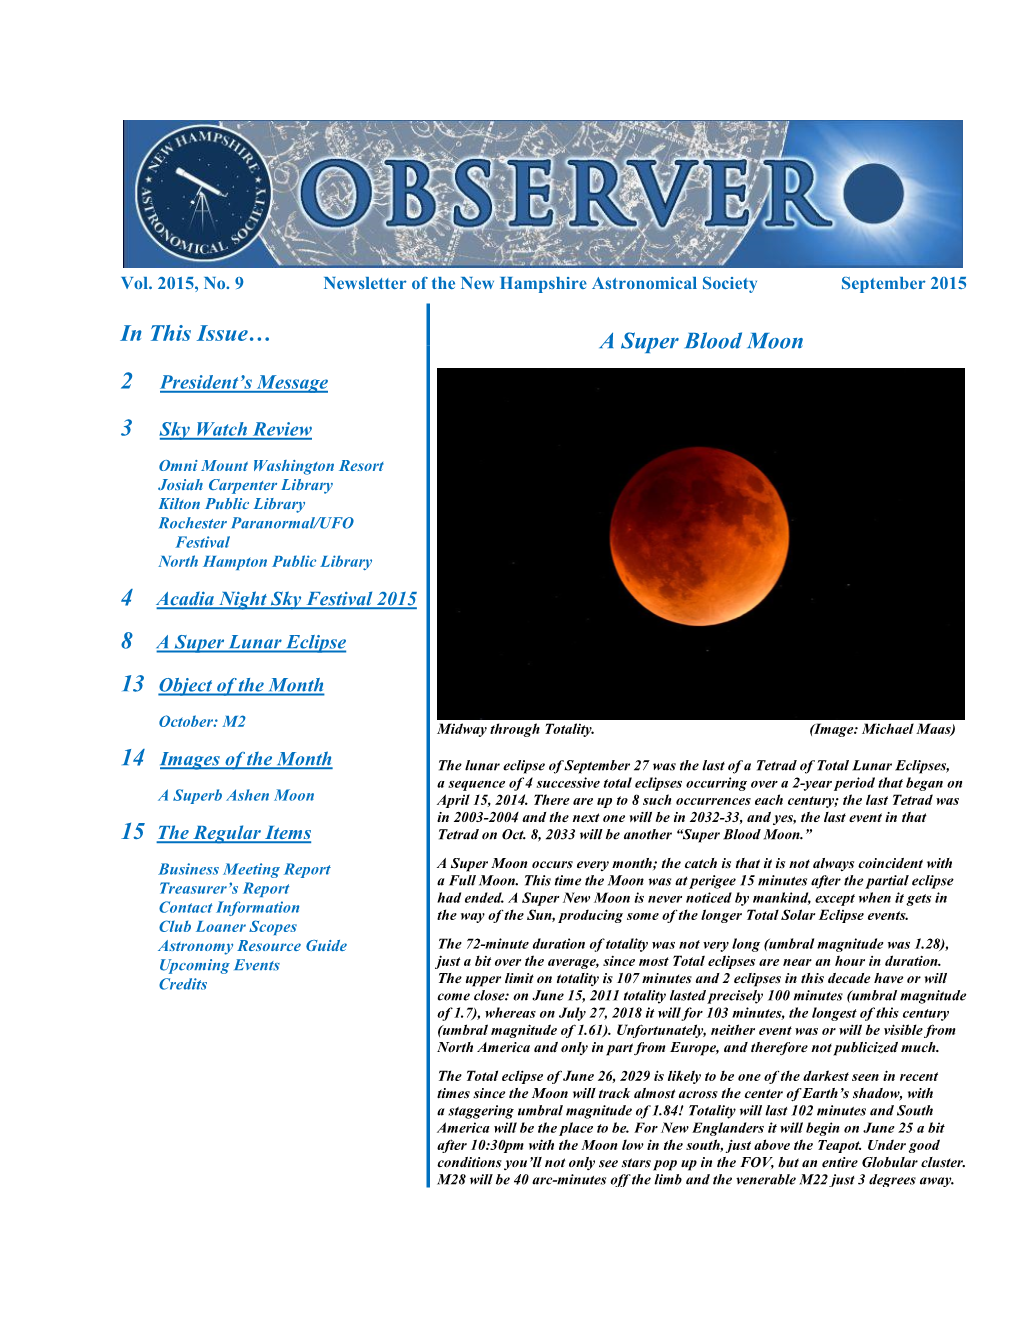 In This Issue… a Super Blood Moon